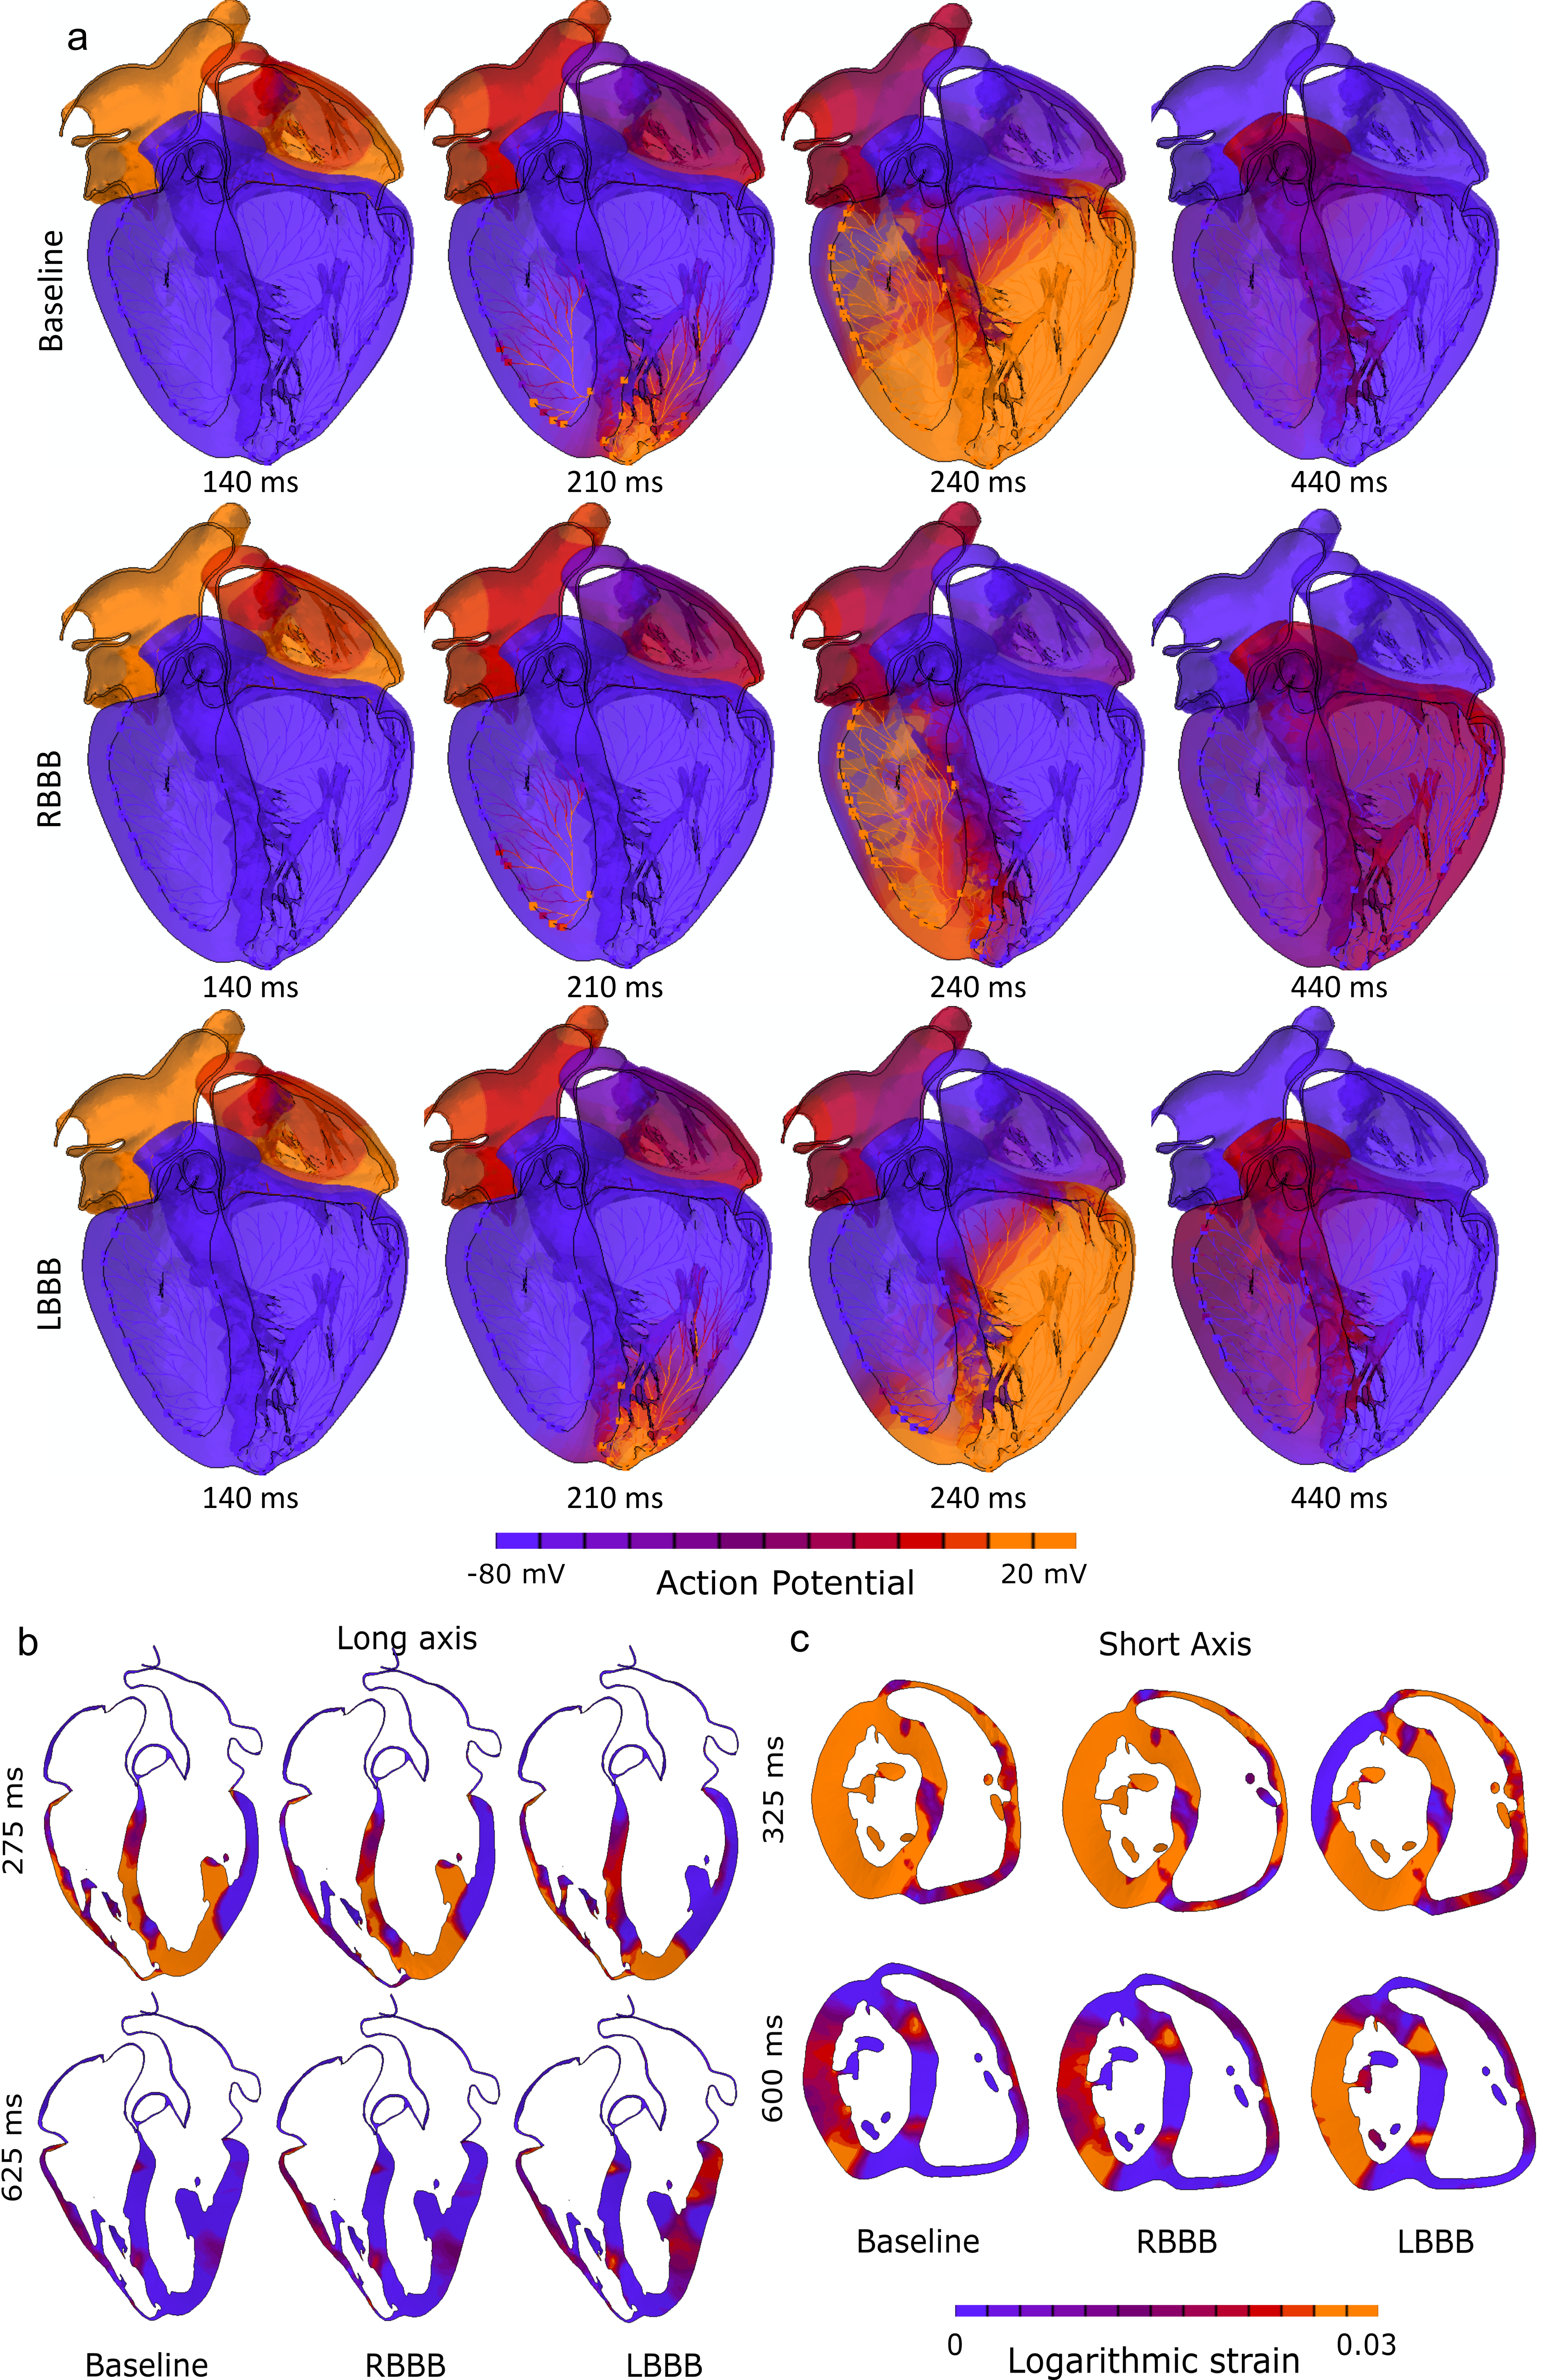 Preexisting conduction abnormalities modeling